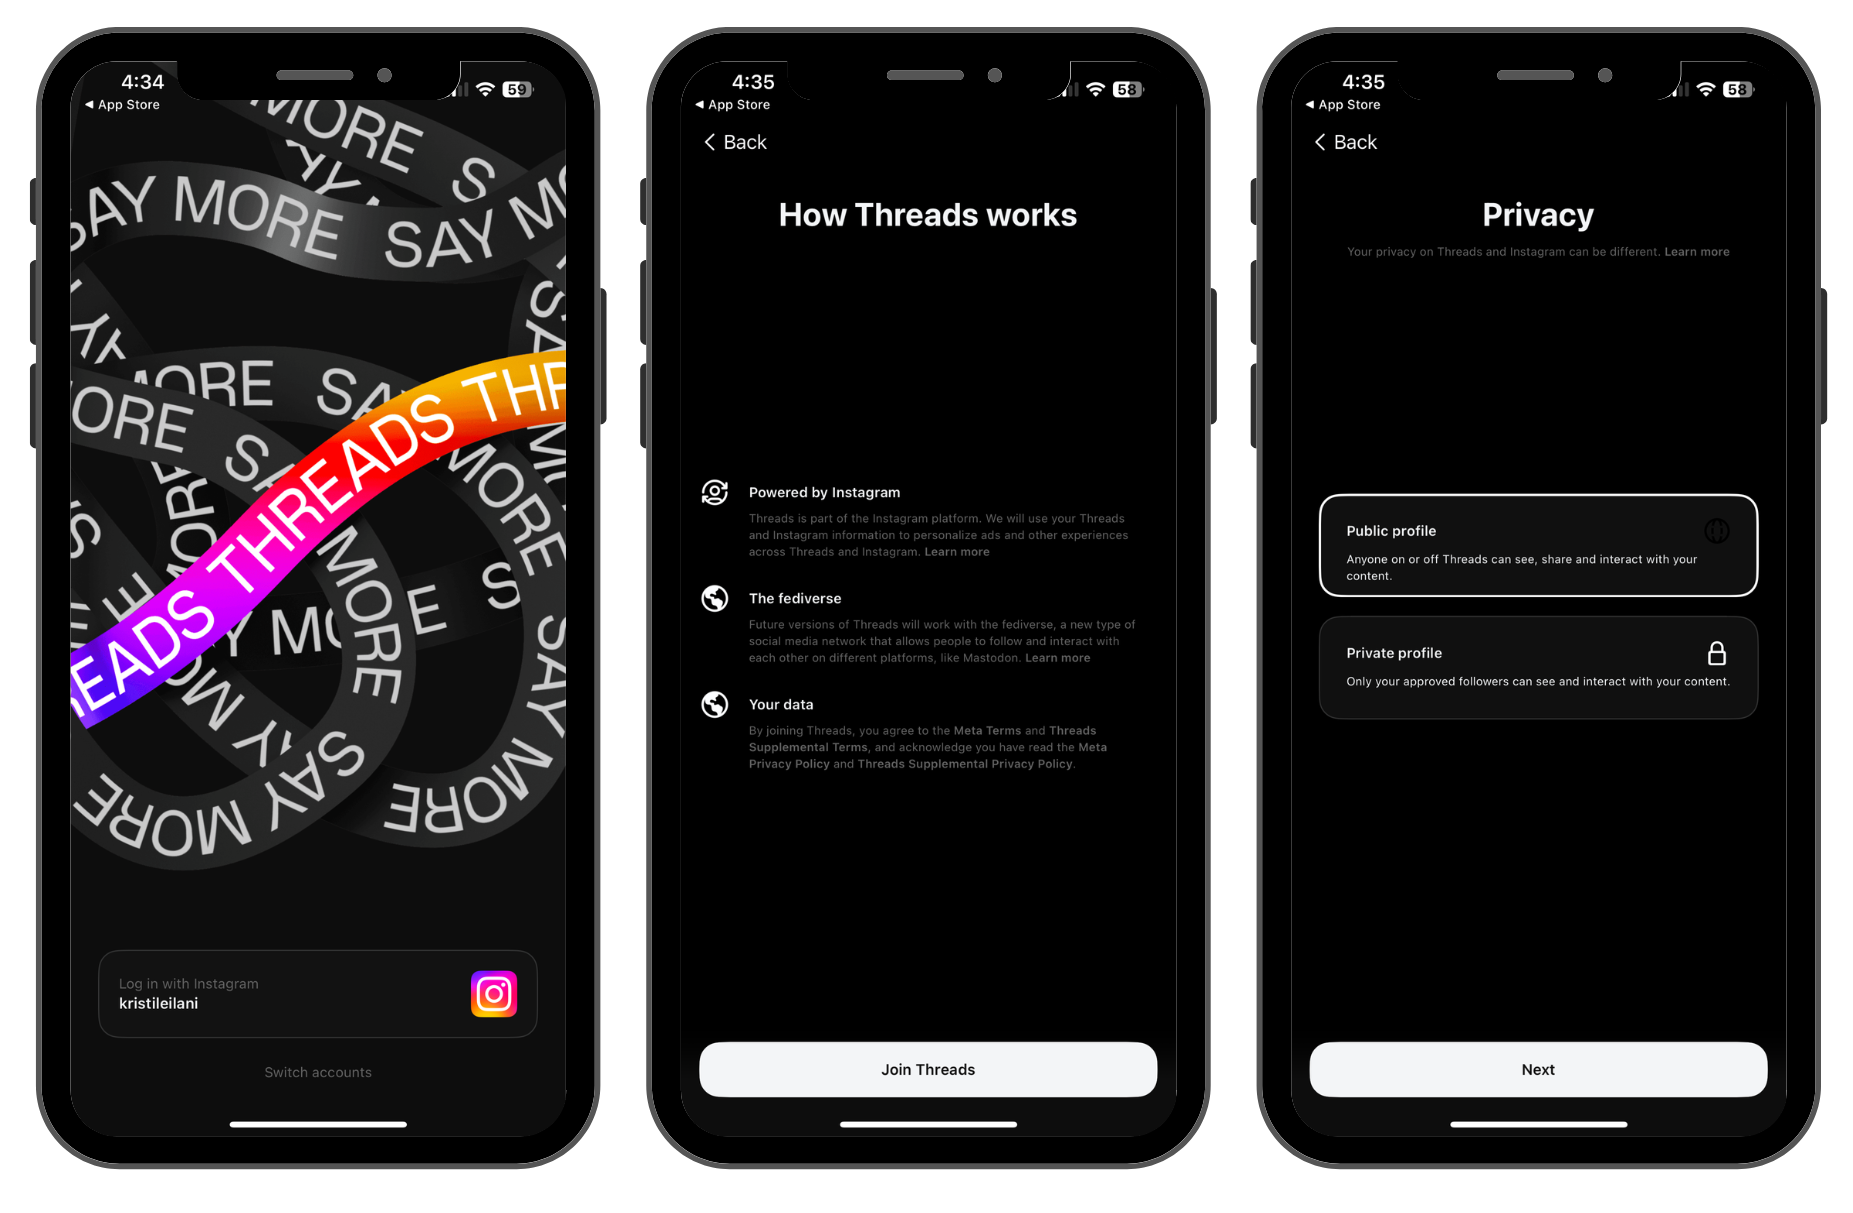 Threads App Reaches 75 Million Users As Twitter Threatens Lawsuit